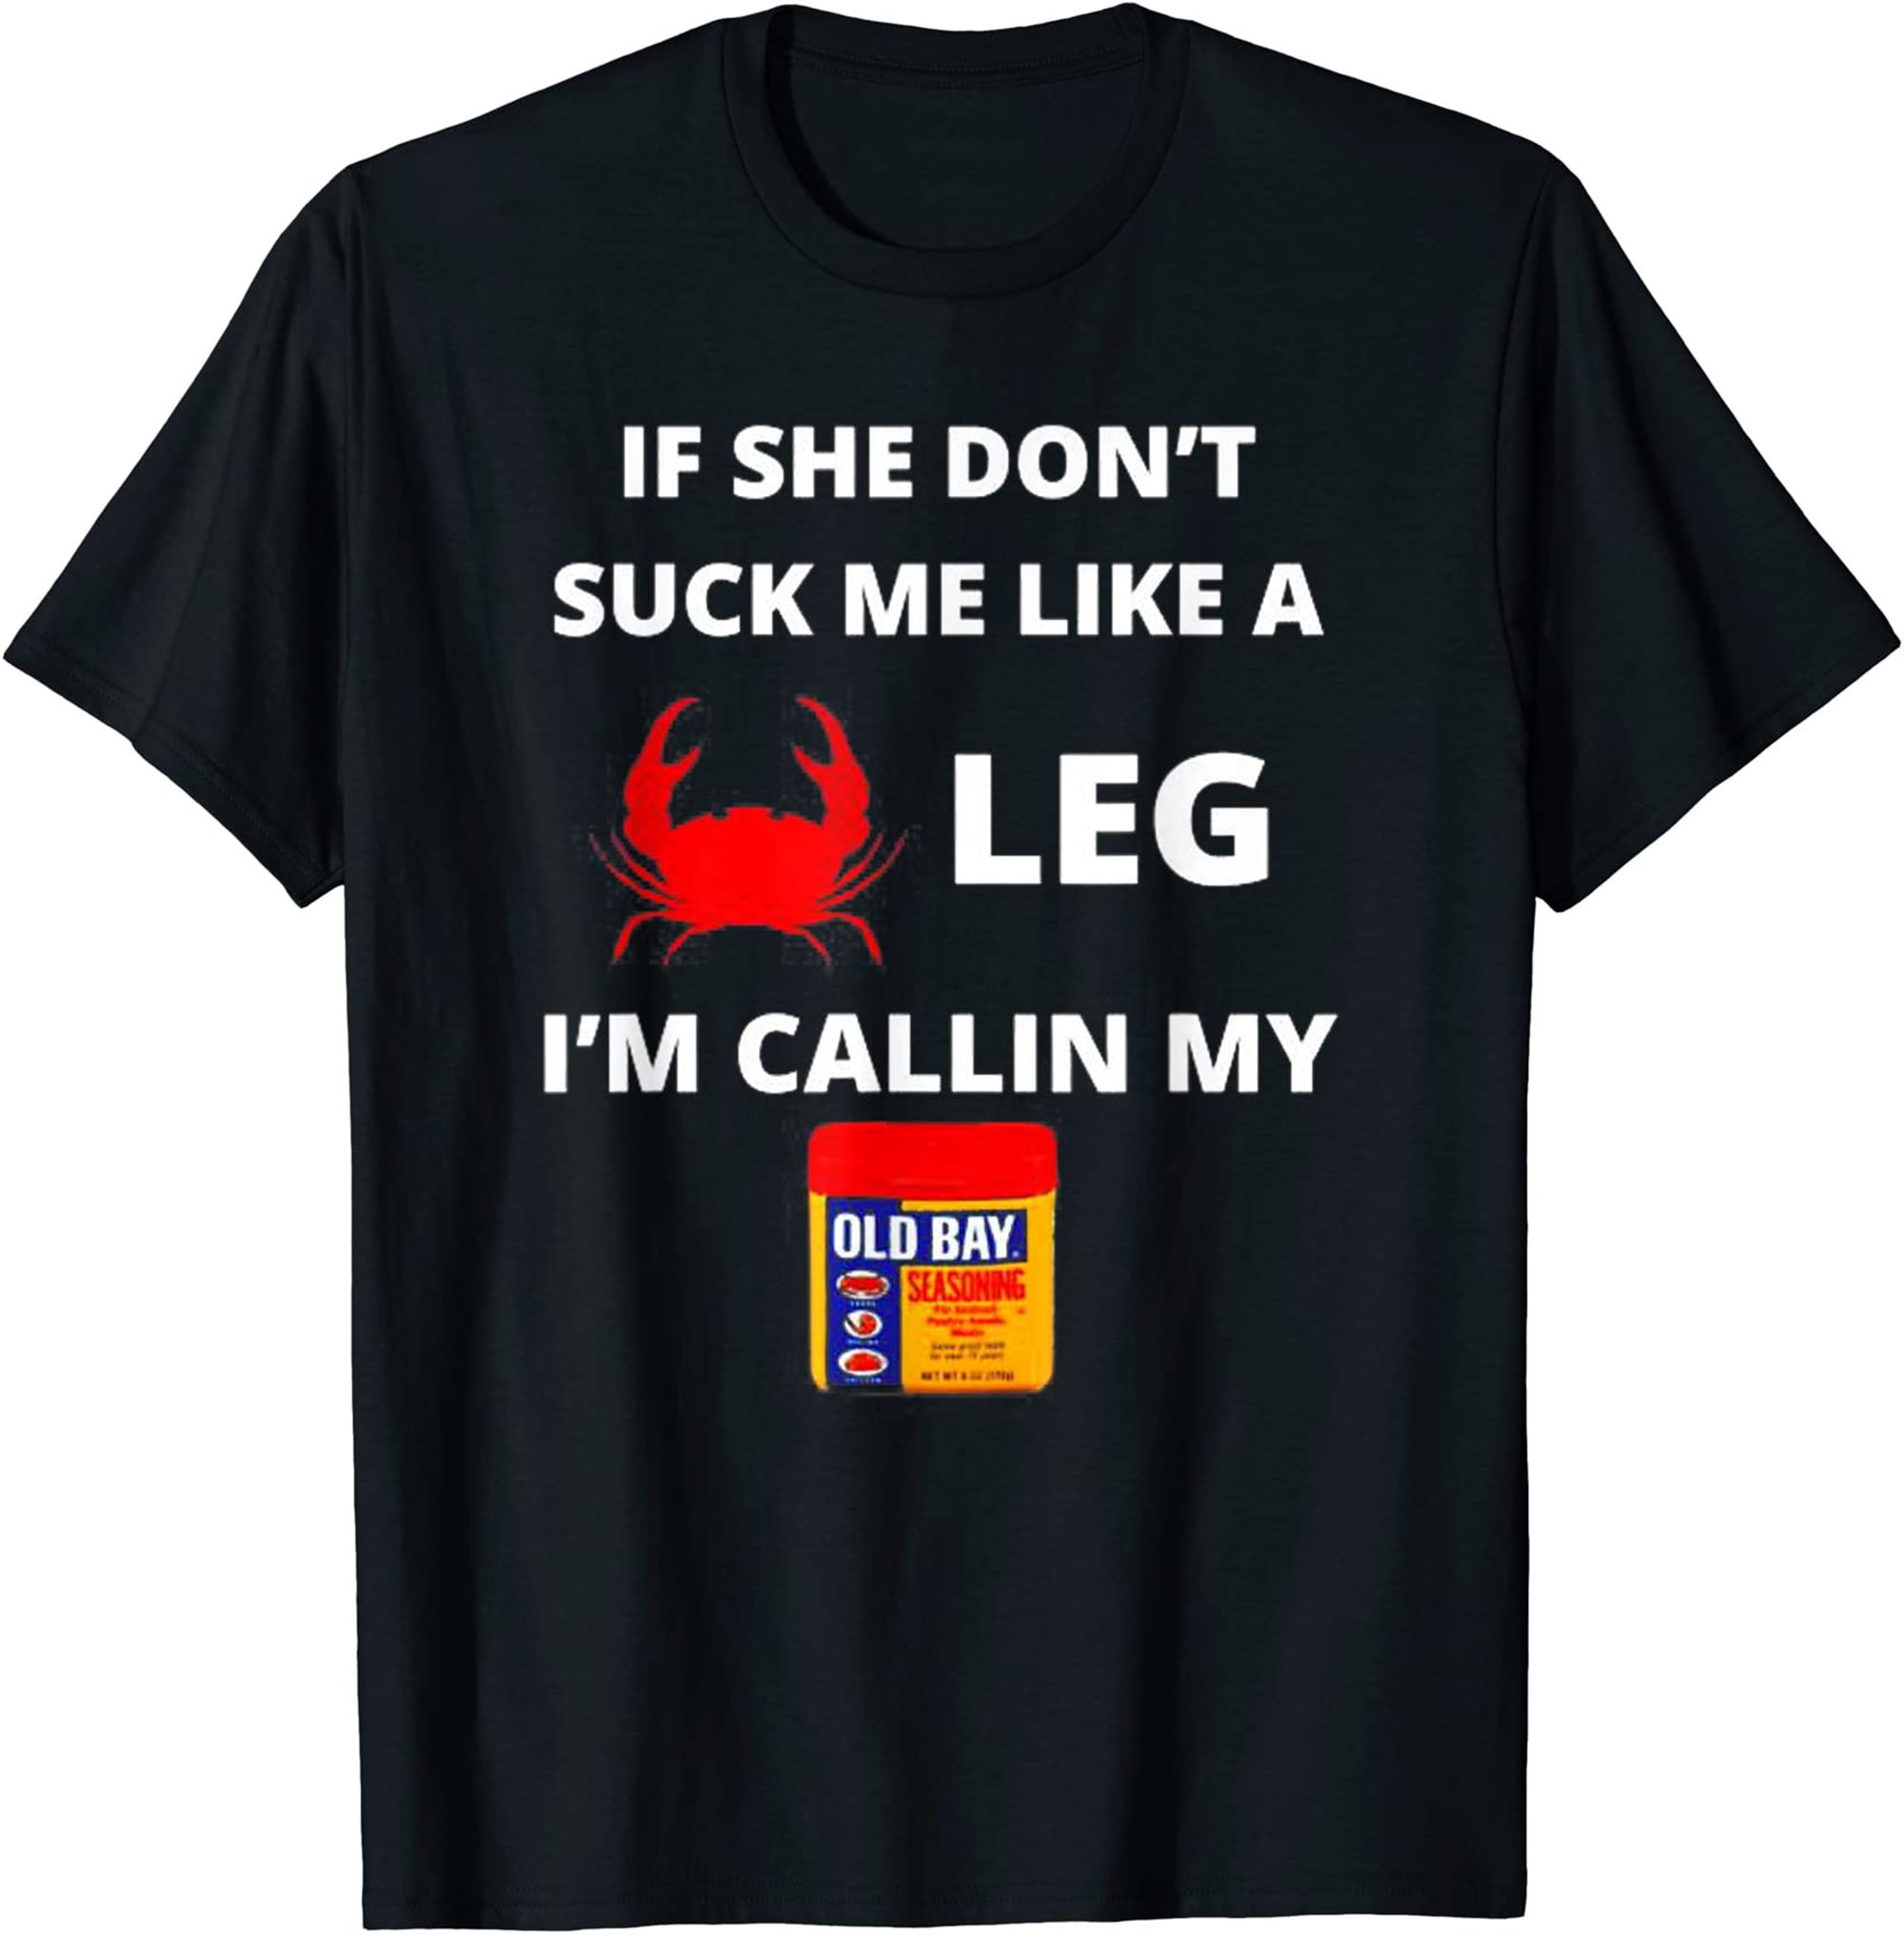 If She Dont Suck Me Like A Leg Im Callin My Old Bay T-shirt Plus Size Up To 5xl